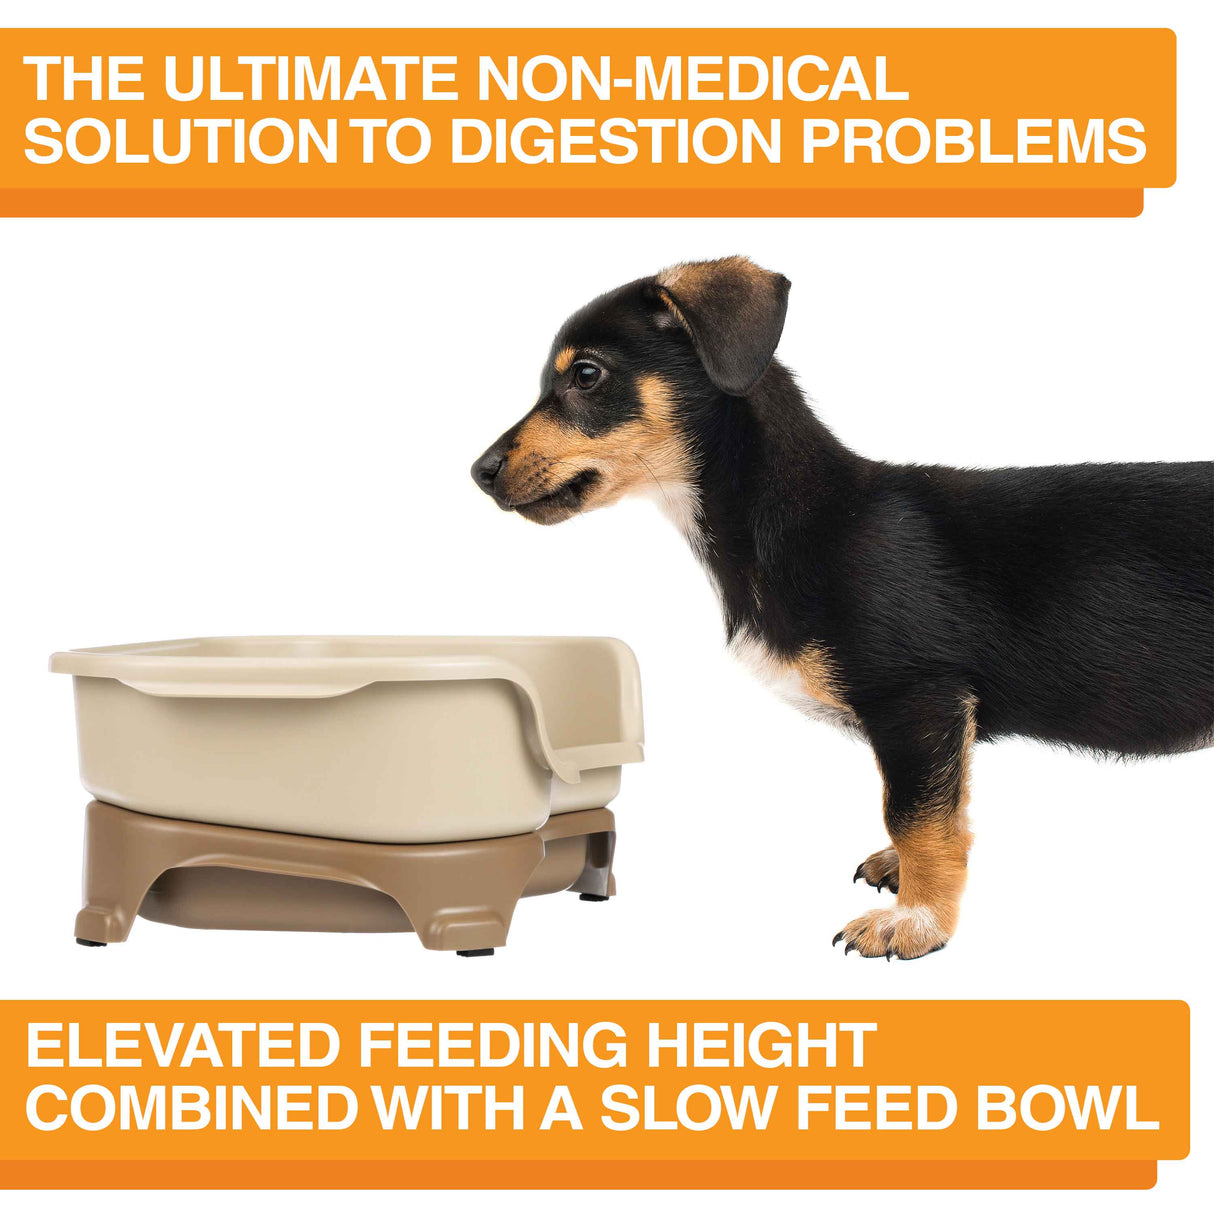 The ultimate non-medical solution to digestion problems - elevated feeding height combined with a slow feed bowl